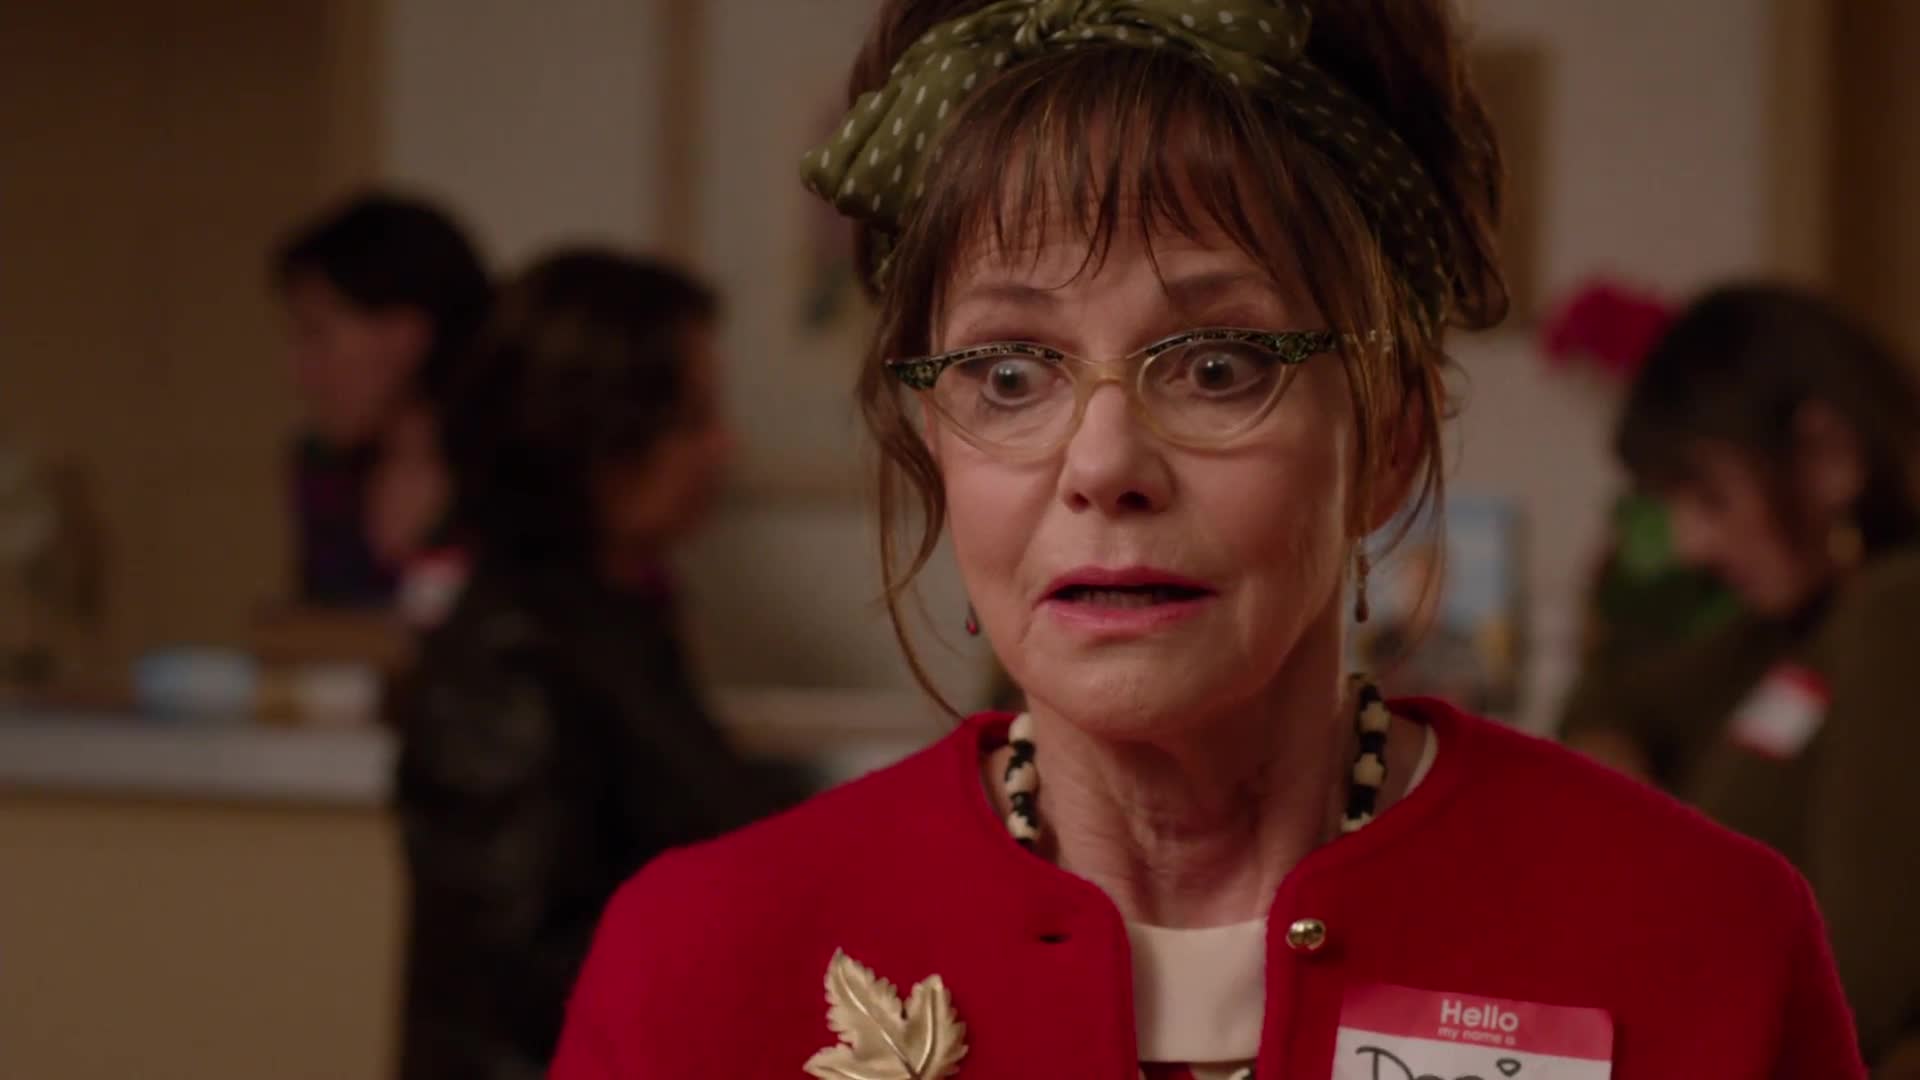 Watch Watch Sally Field in Her First Starring Movie Role in Over 20 Years Exclusives Vanity Fair